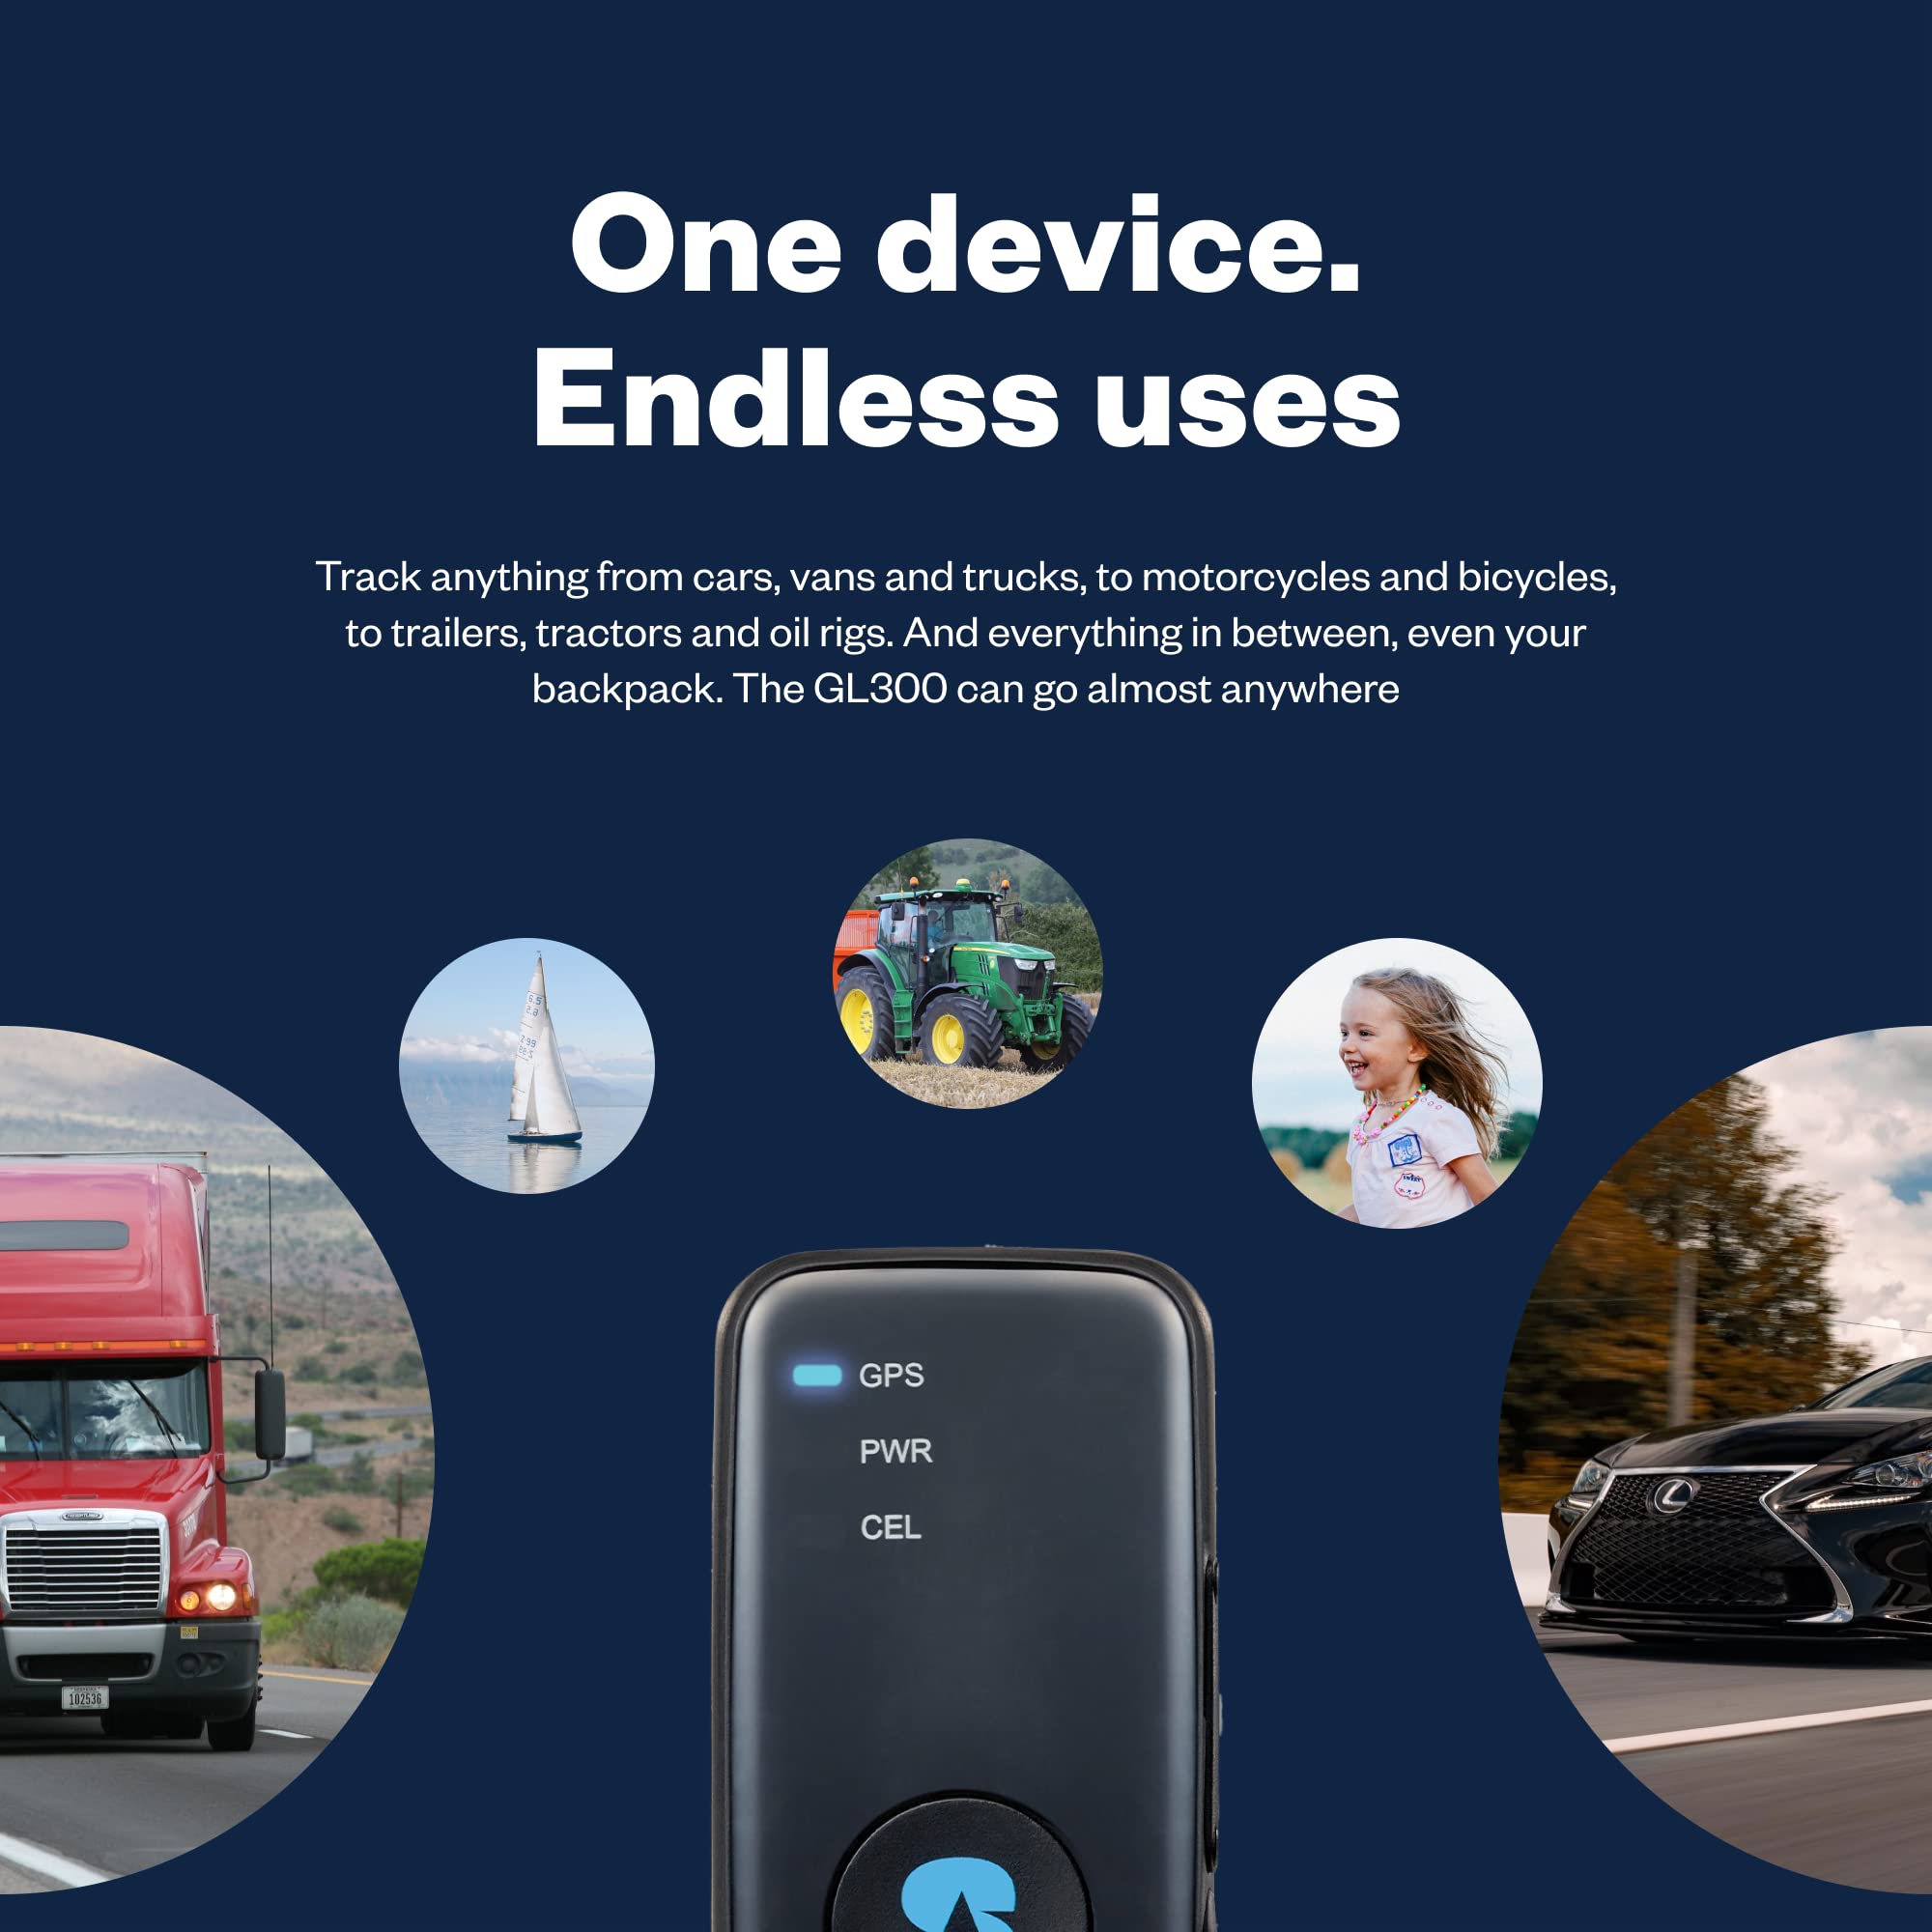 Spytec GPS GL300 and Hardwire Kit GPS Tracker for Vehicles, Cars, Trucks, Motorcycles, Loved Ones and Asset Tracker with Unlimited US and Worldwide Real-Time Tracking App - Subscription Required